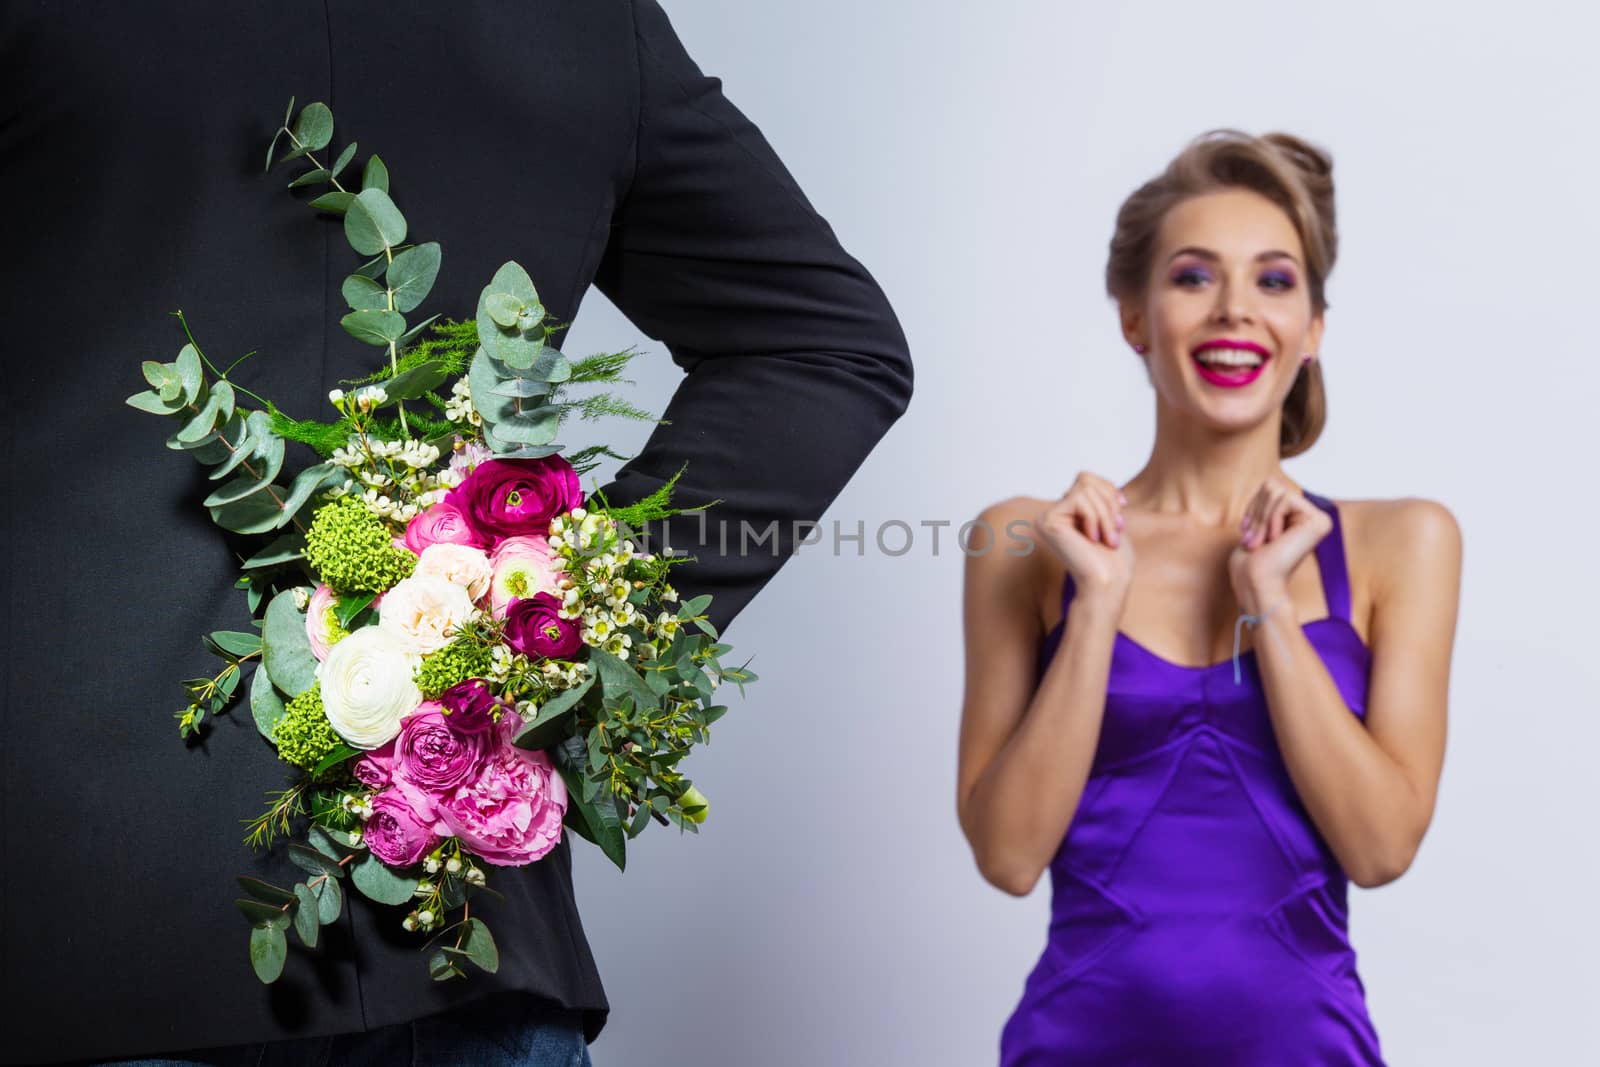 Man brings flowers to woman and hiding them behind back, womanin evening dress is surprised and happy